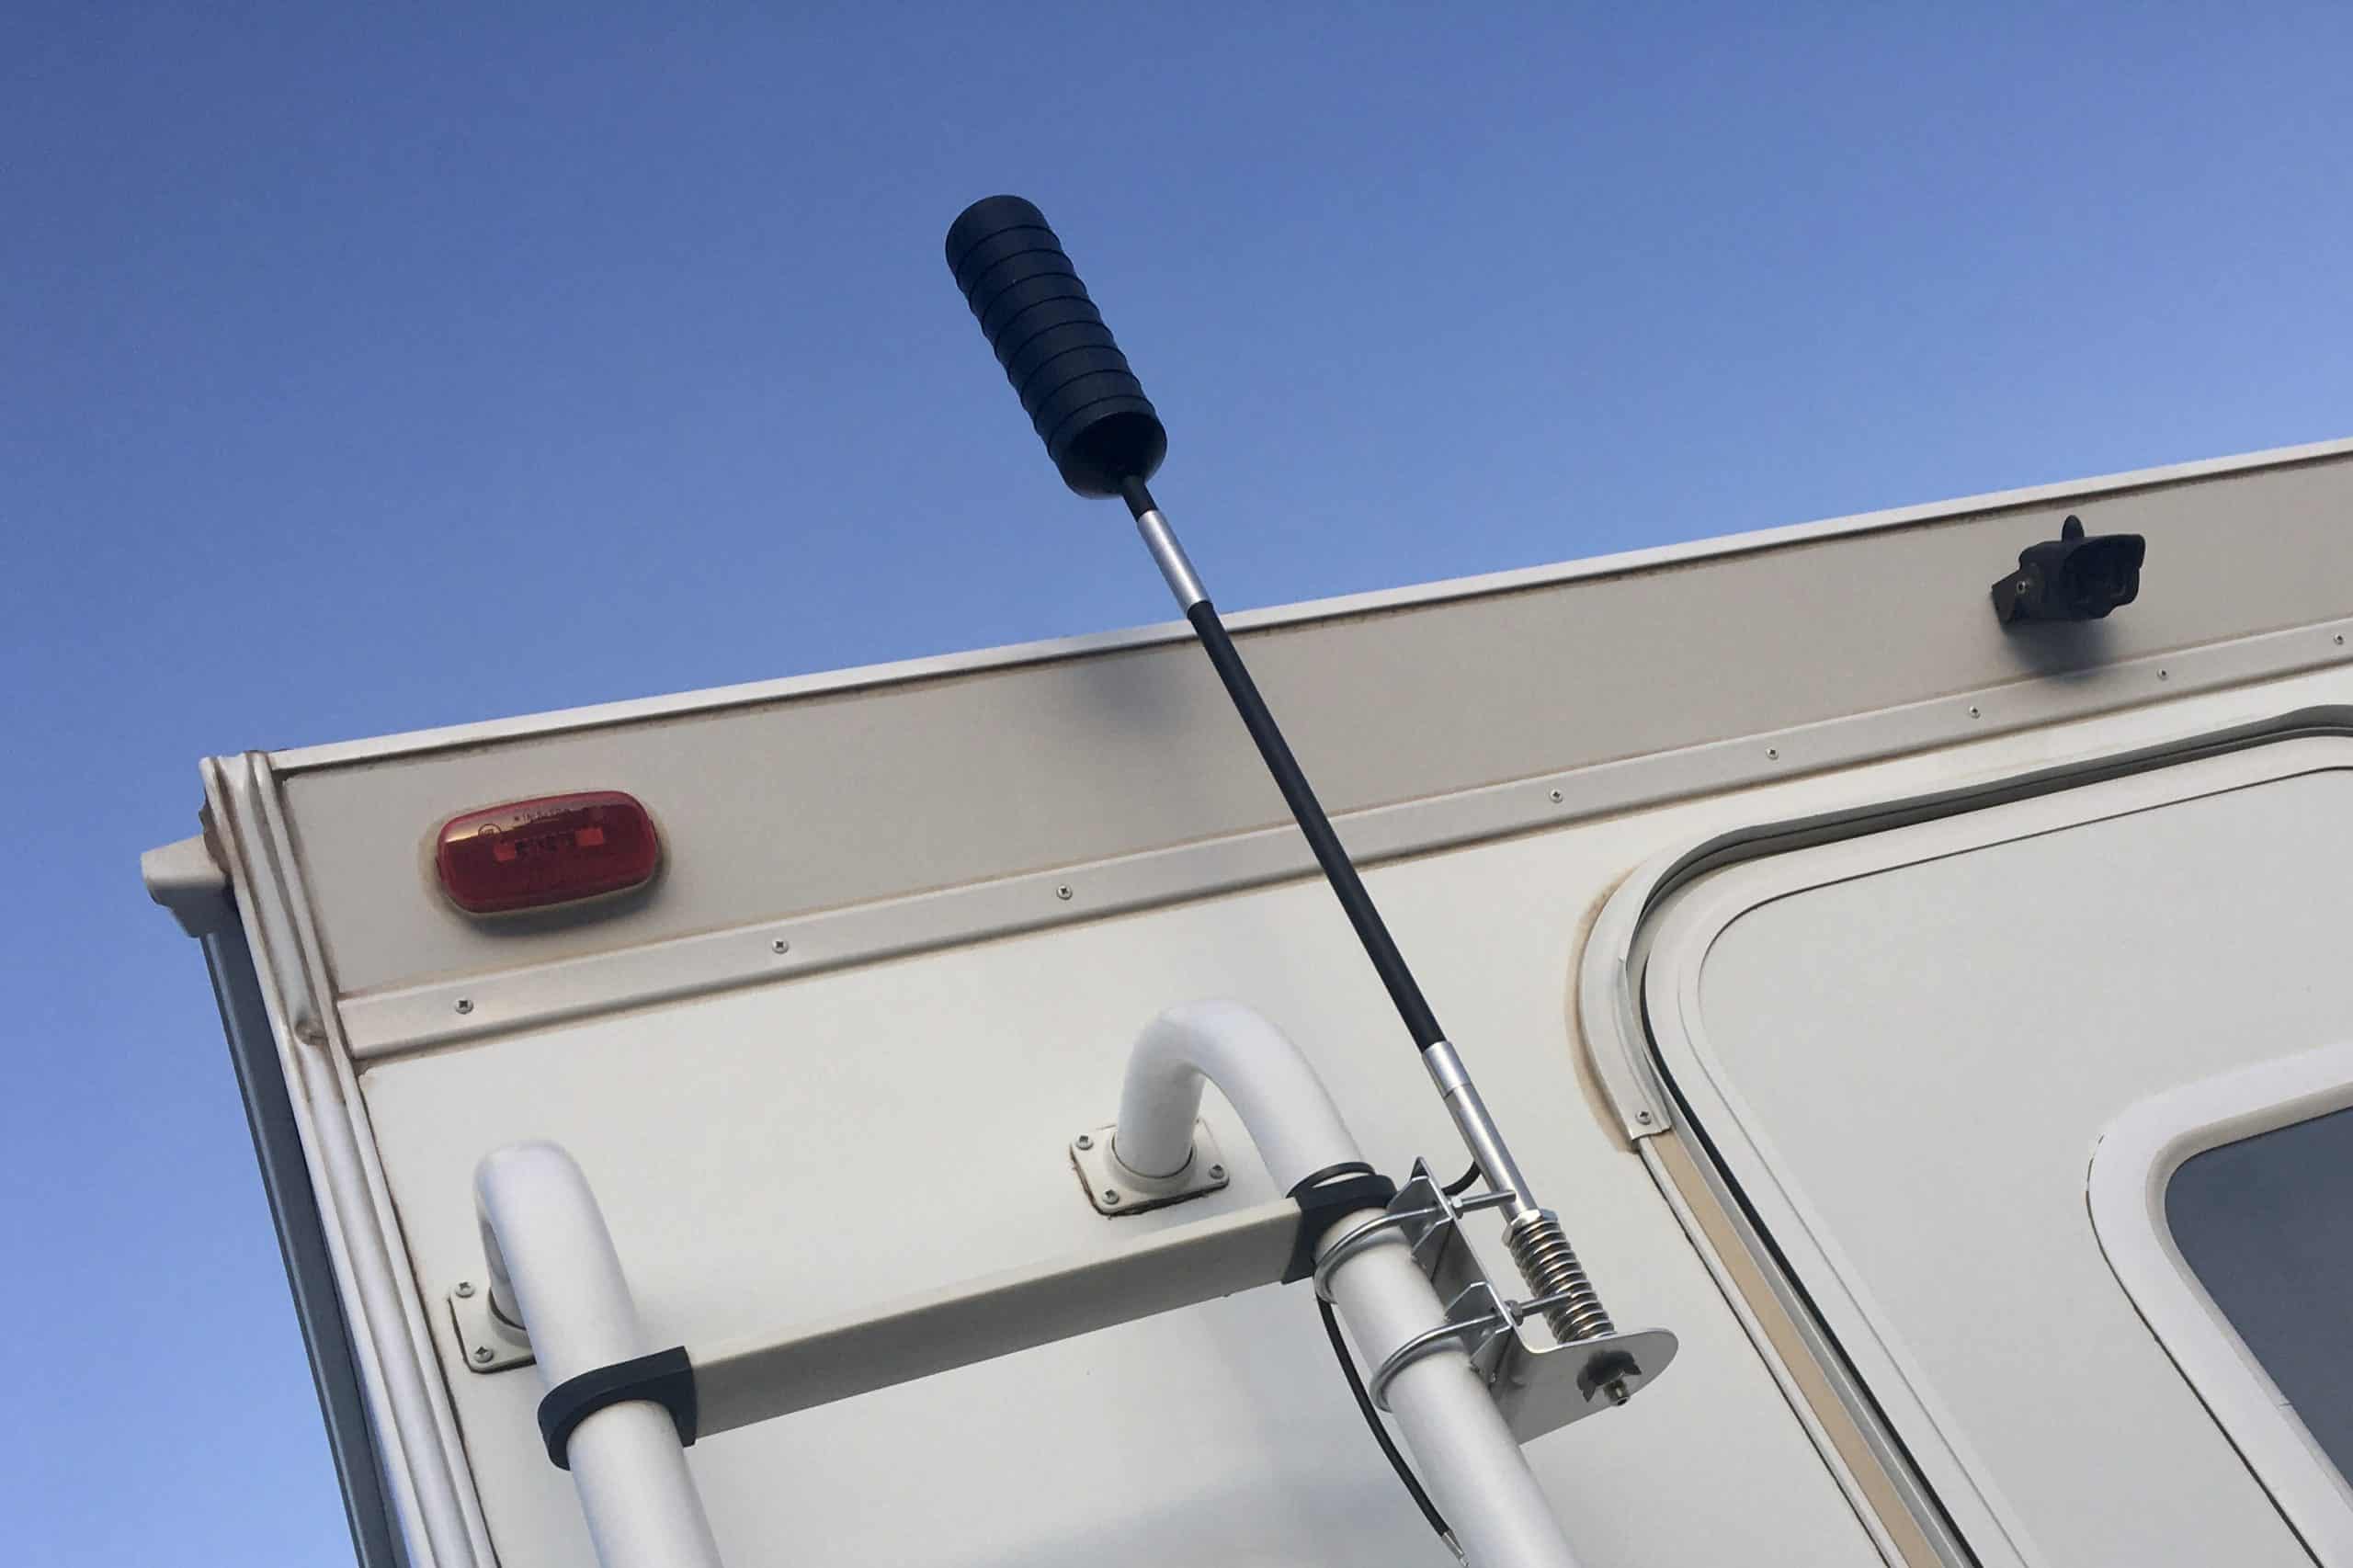 Best RV Gadgets To Make You Feel Comfortable